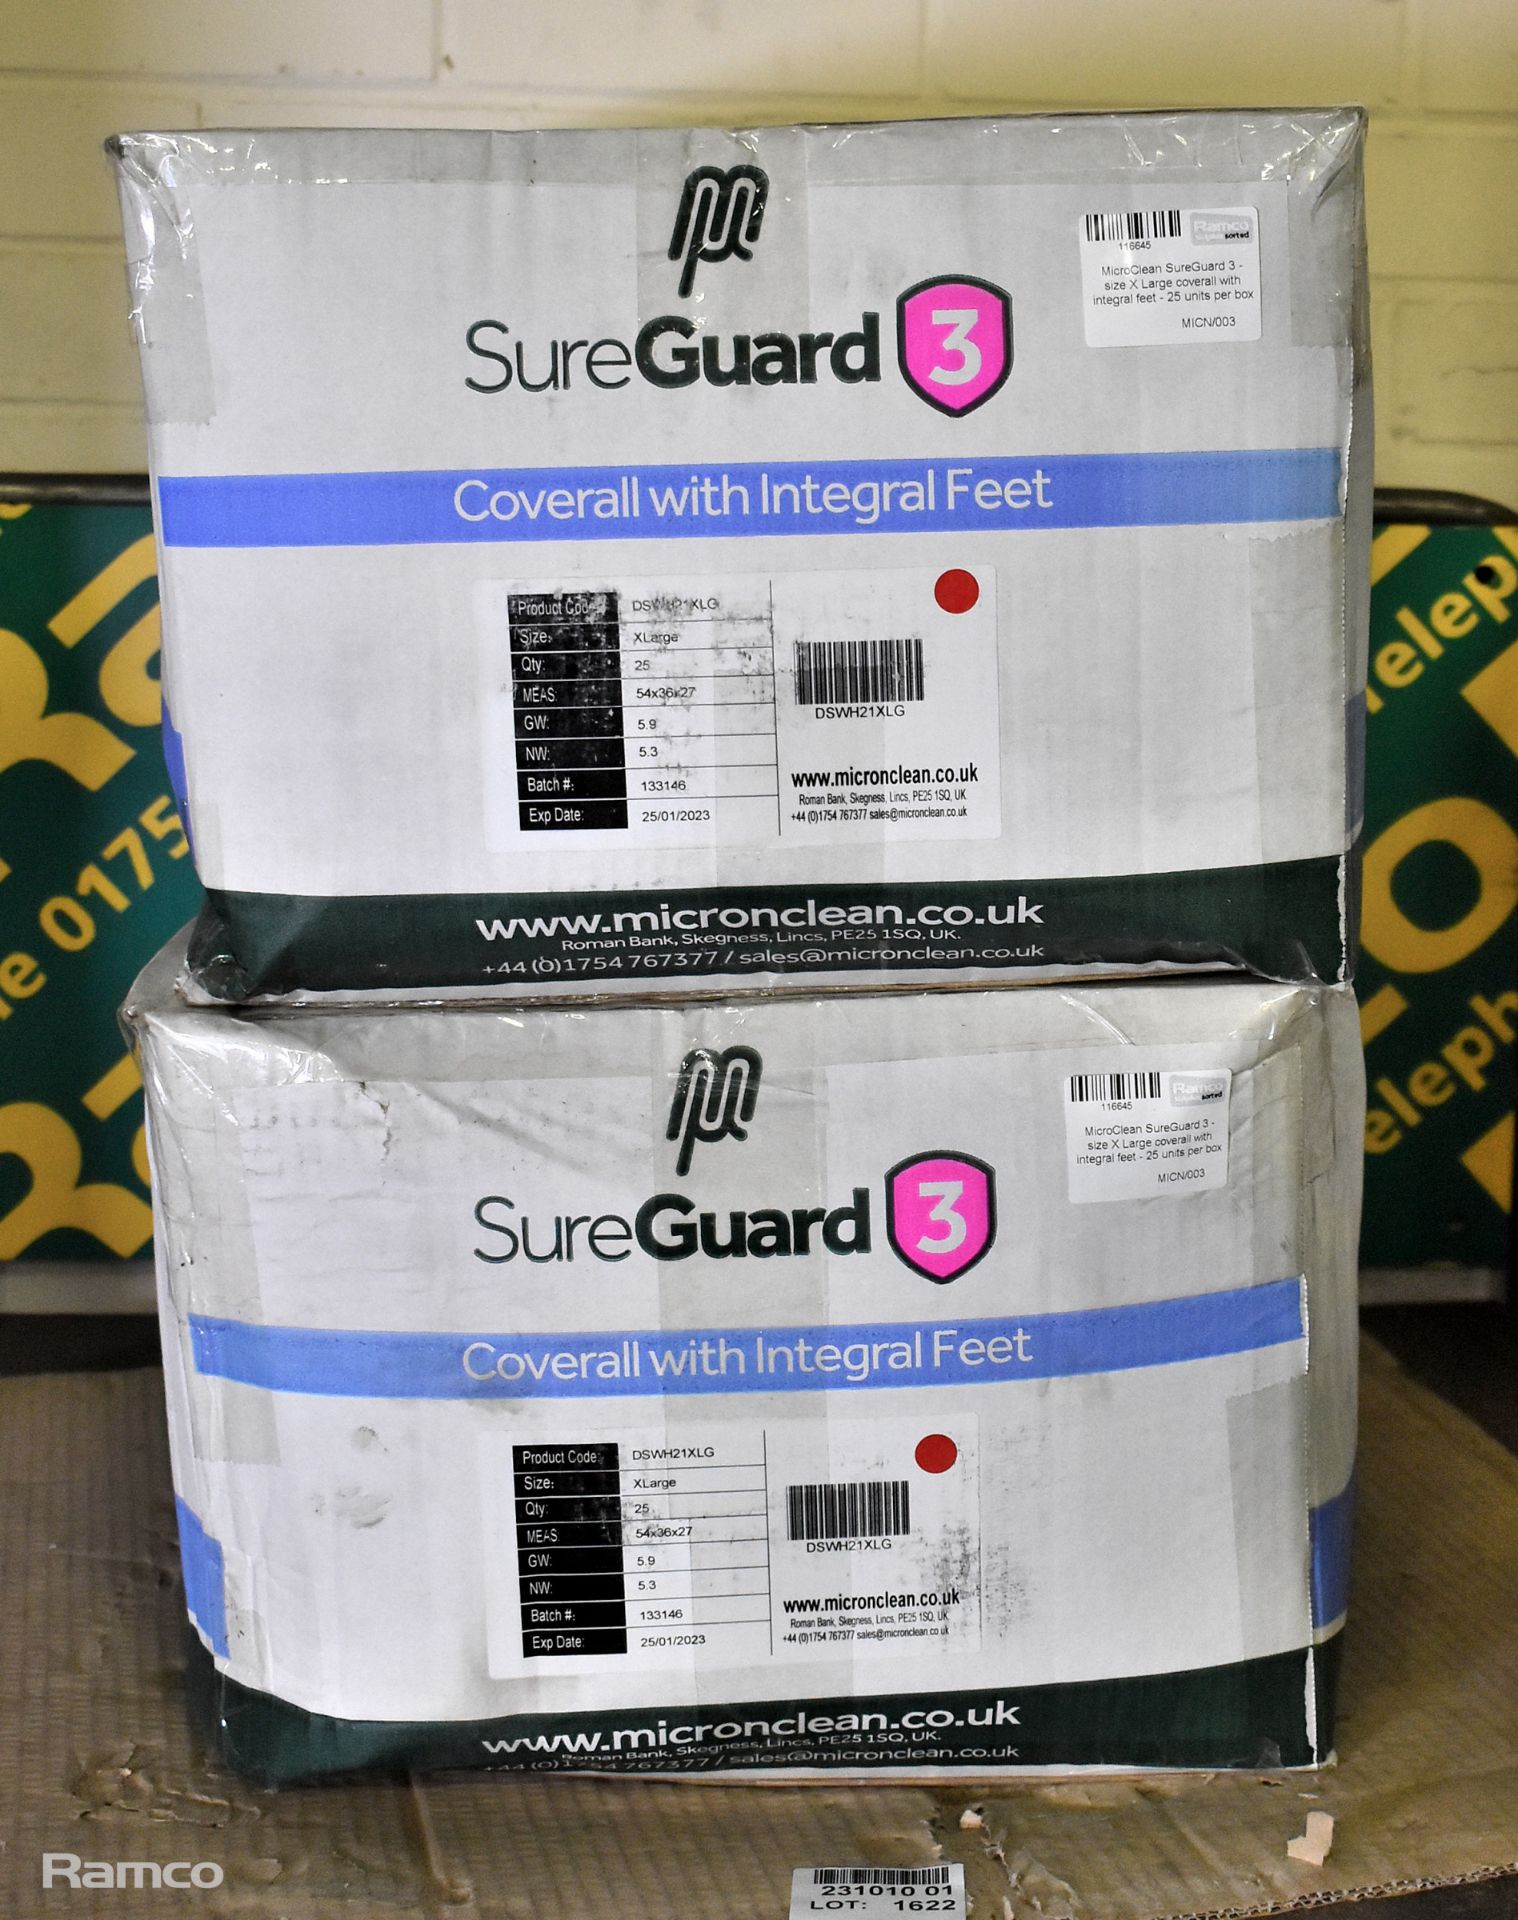 2x boxes of MicroClean SureGuard 3 coveralls with integral feet - size X Large - 25 units per box